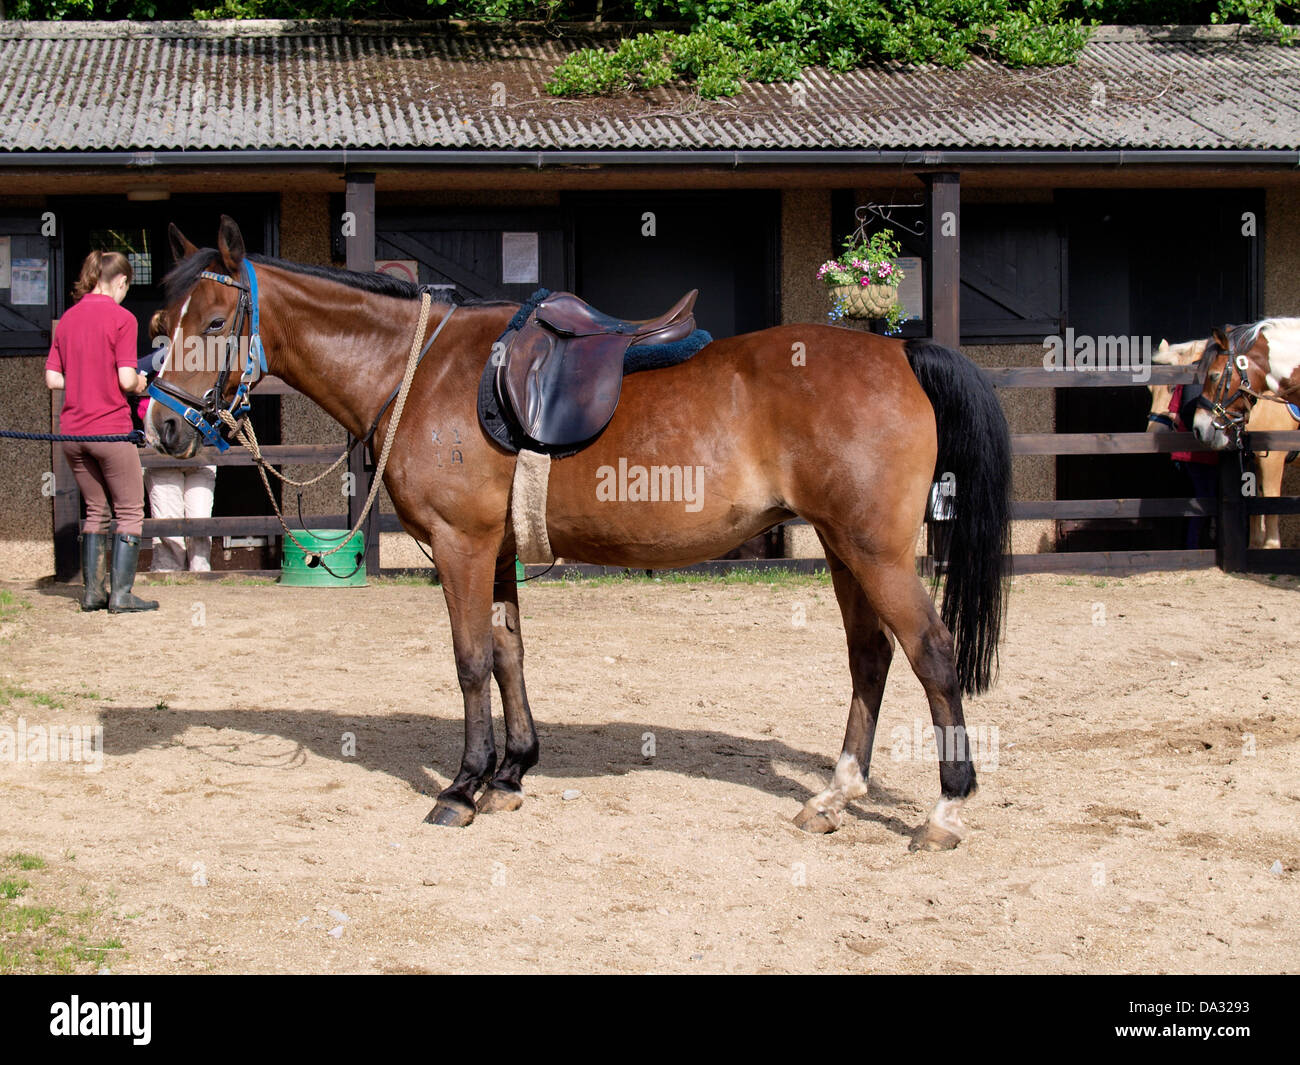 Horse saddled and ready to go at a riding school, UK 2013 Stock Photo